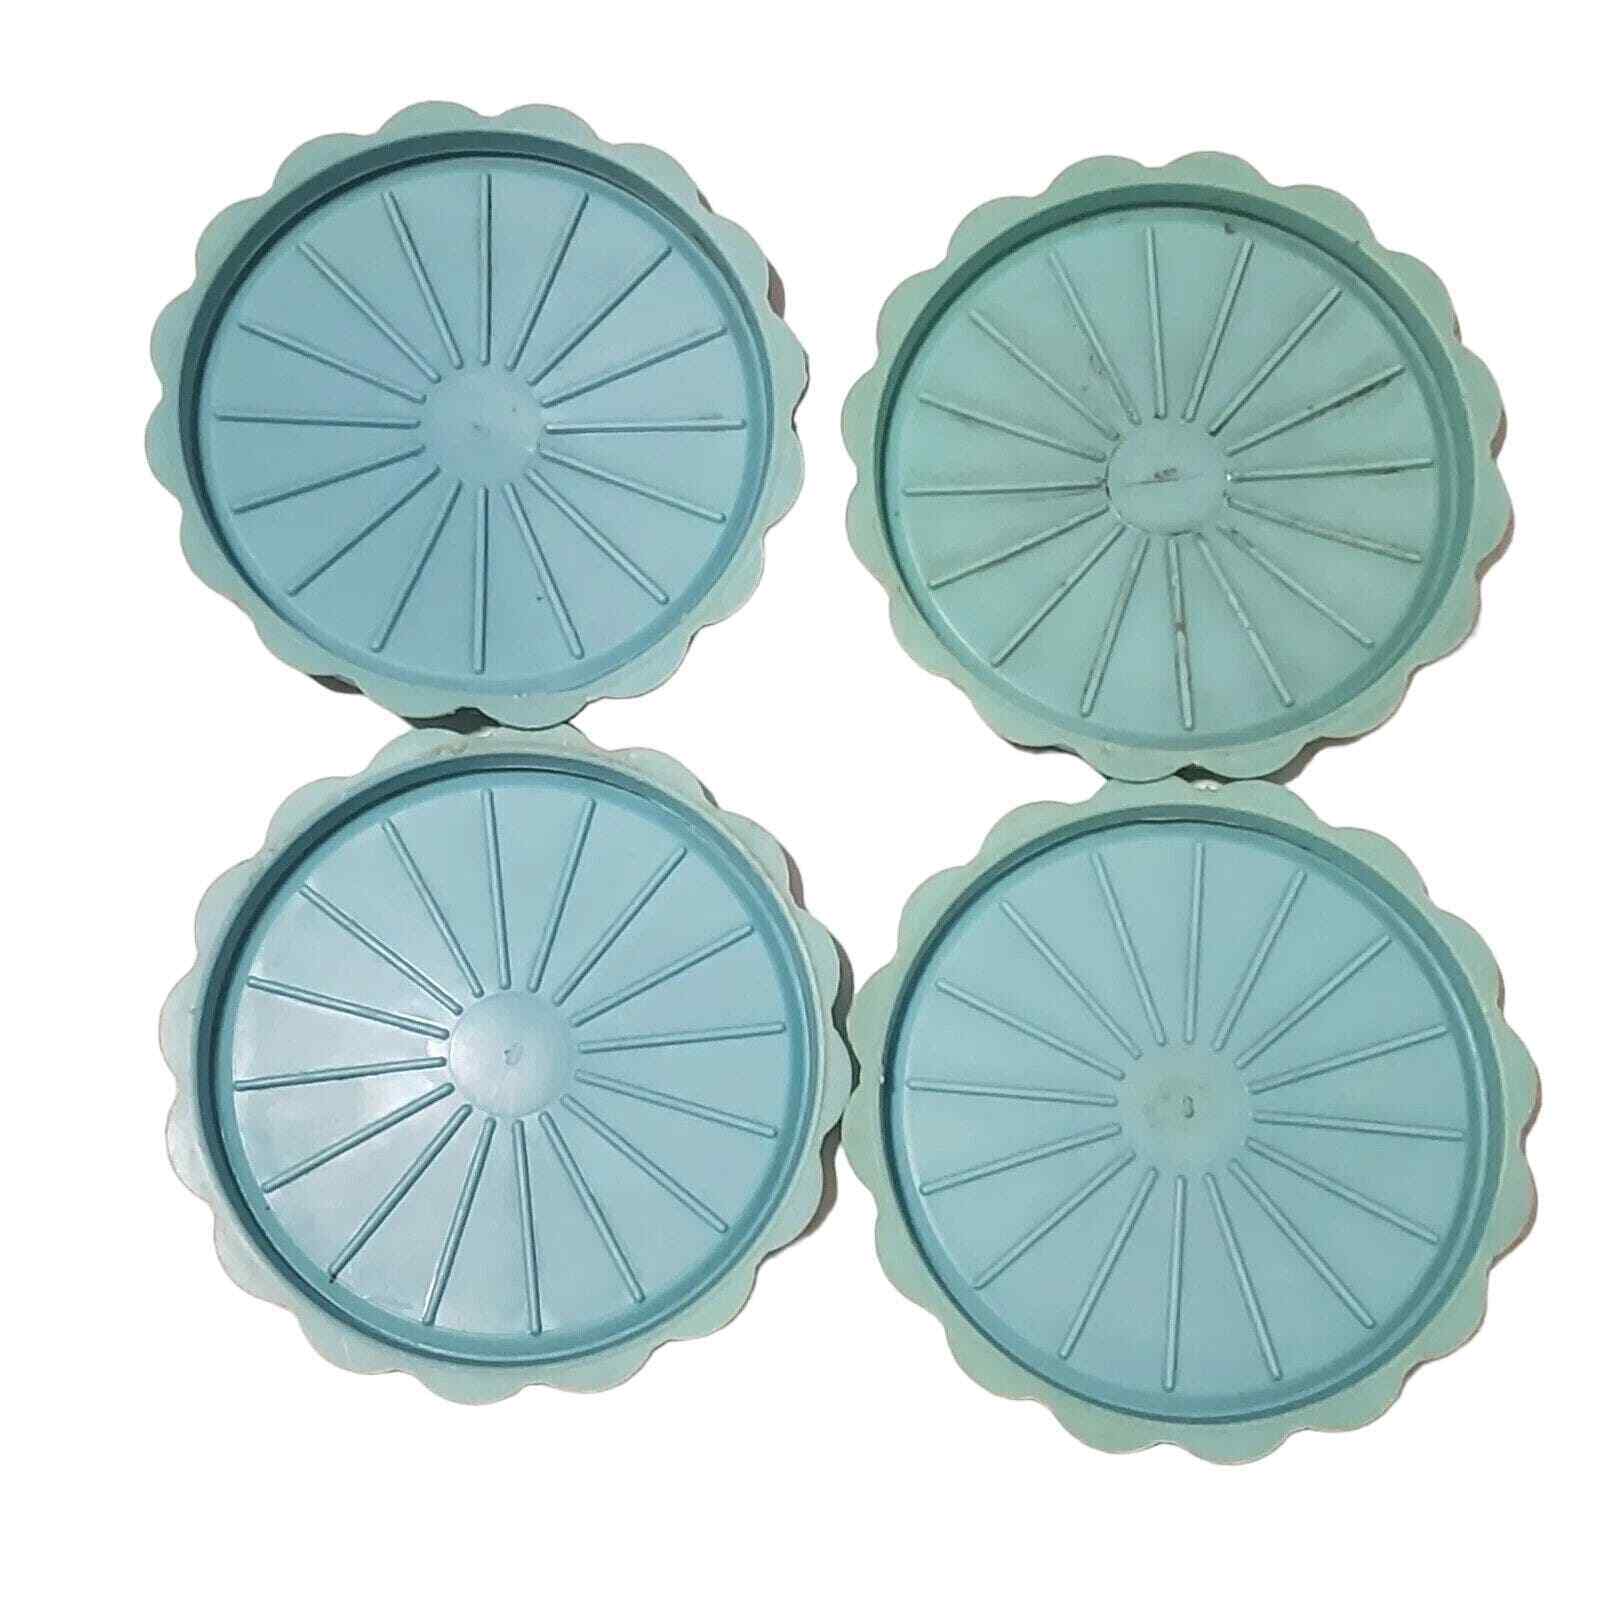 Vintage - Blisscraft of Hollywood Set of 4 Coasters Blue Turquoise Teal